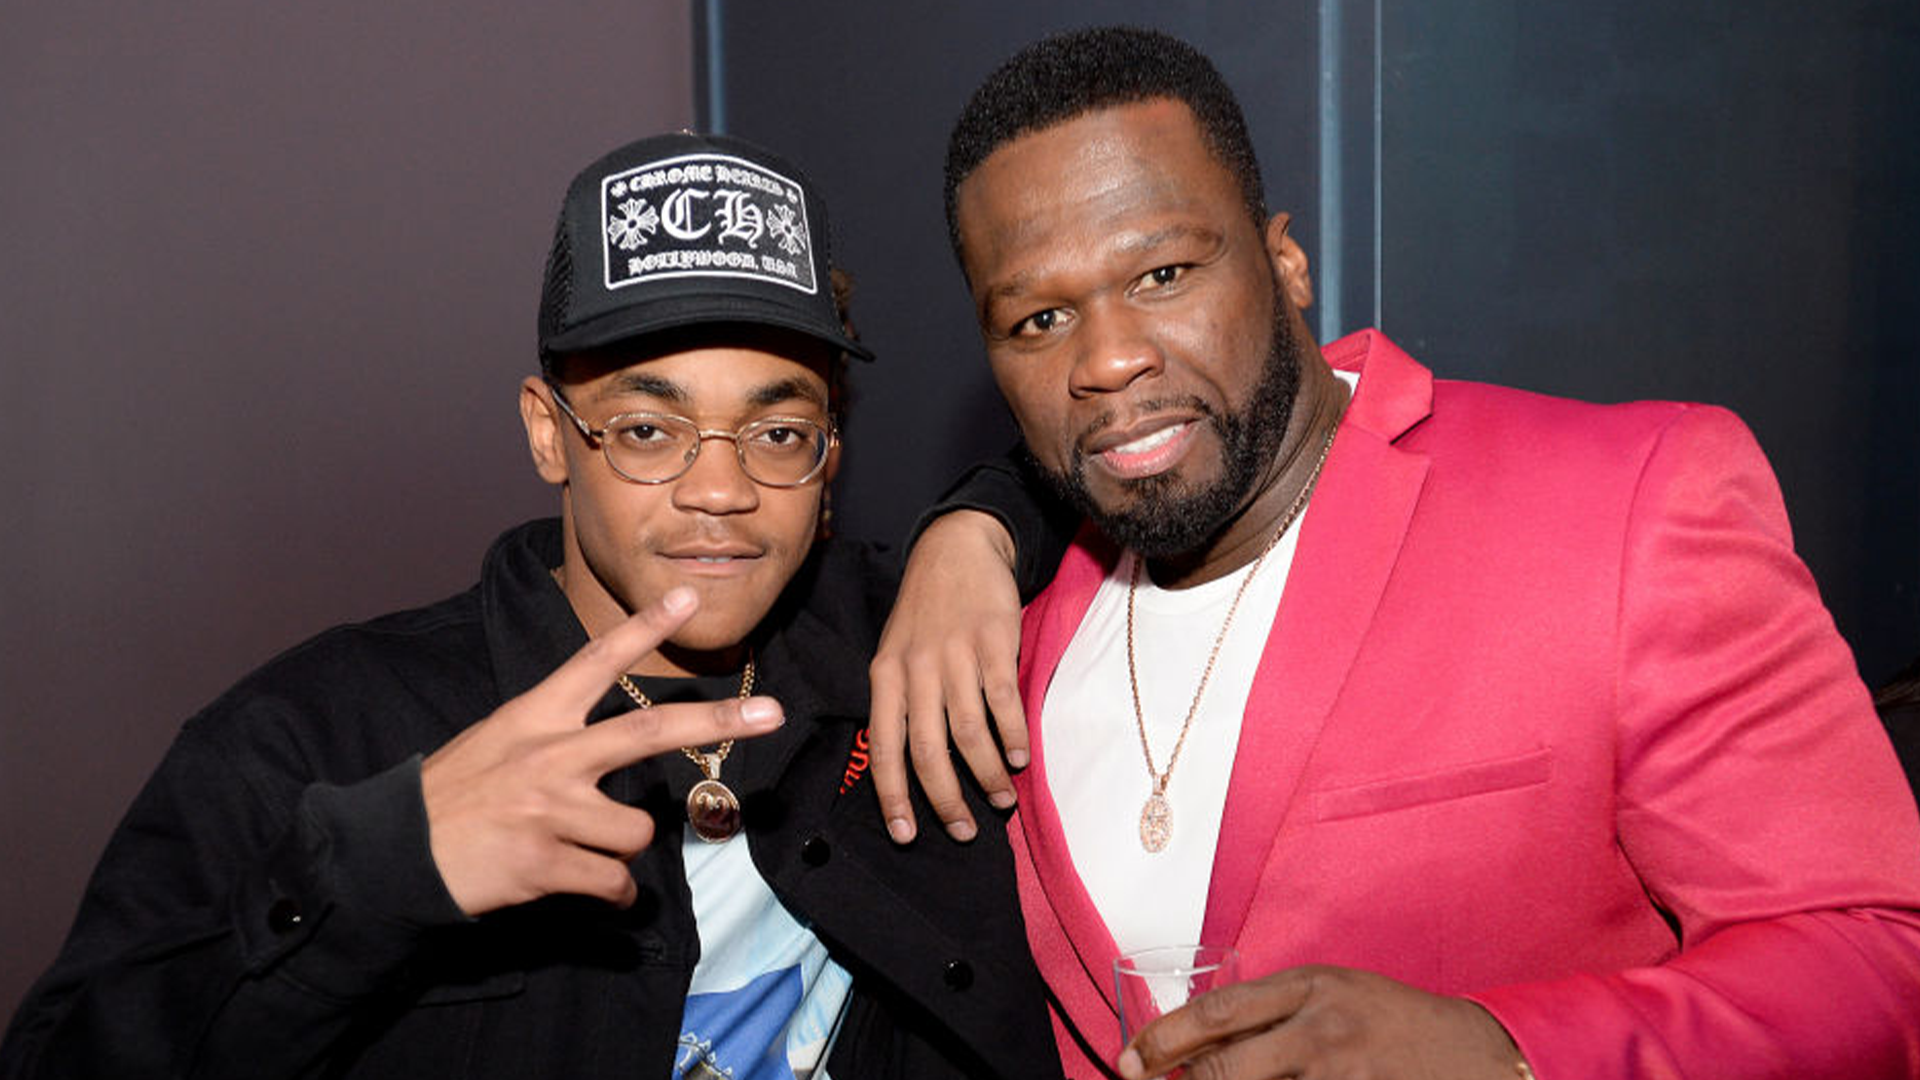 Michael Rainey Jr. Shares A Piece Of Financial Advice That He Learned From His Mentor 50 Cent